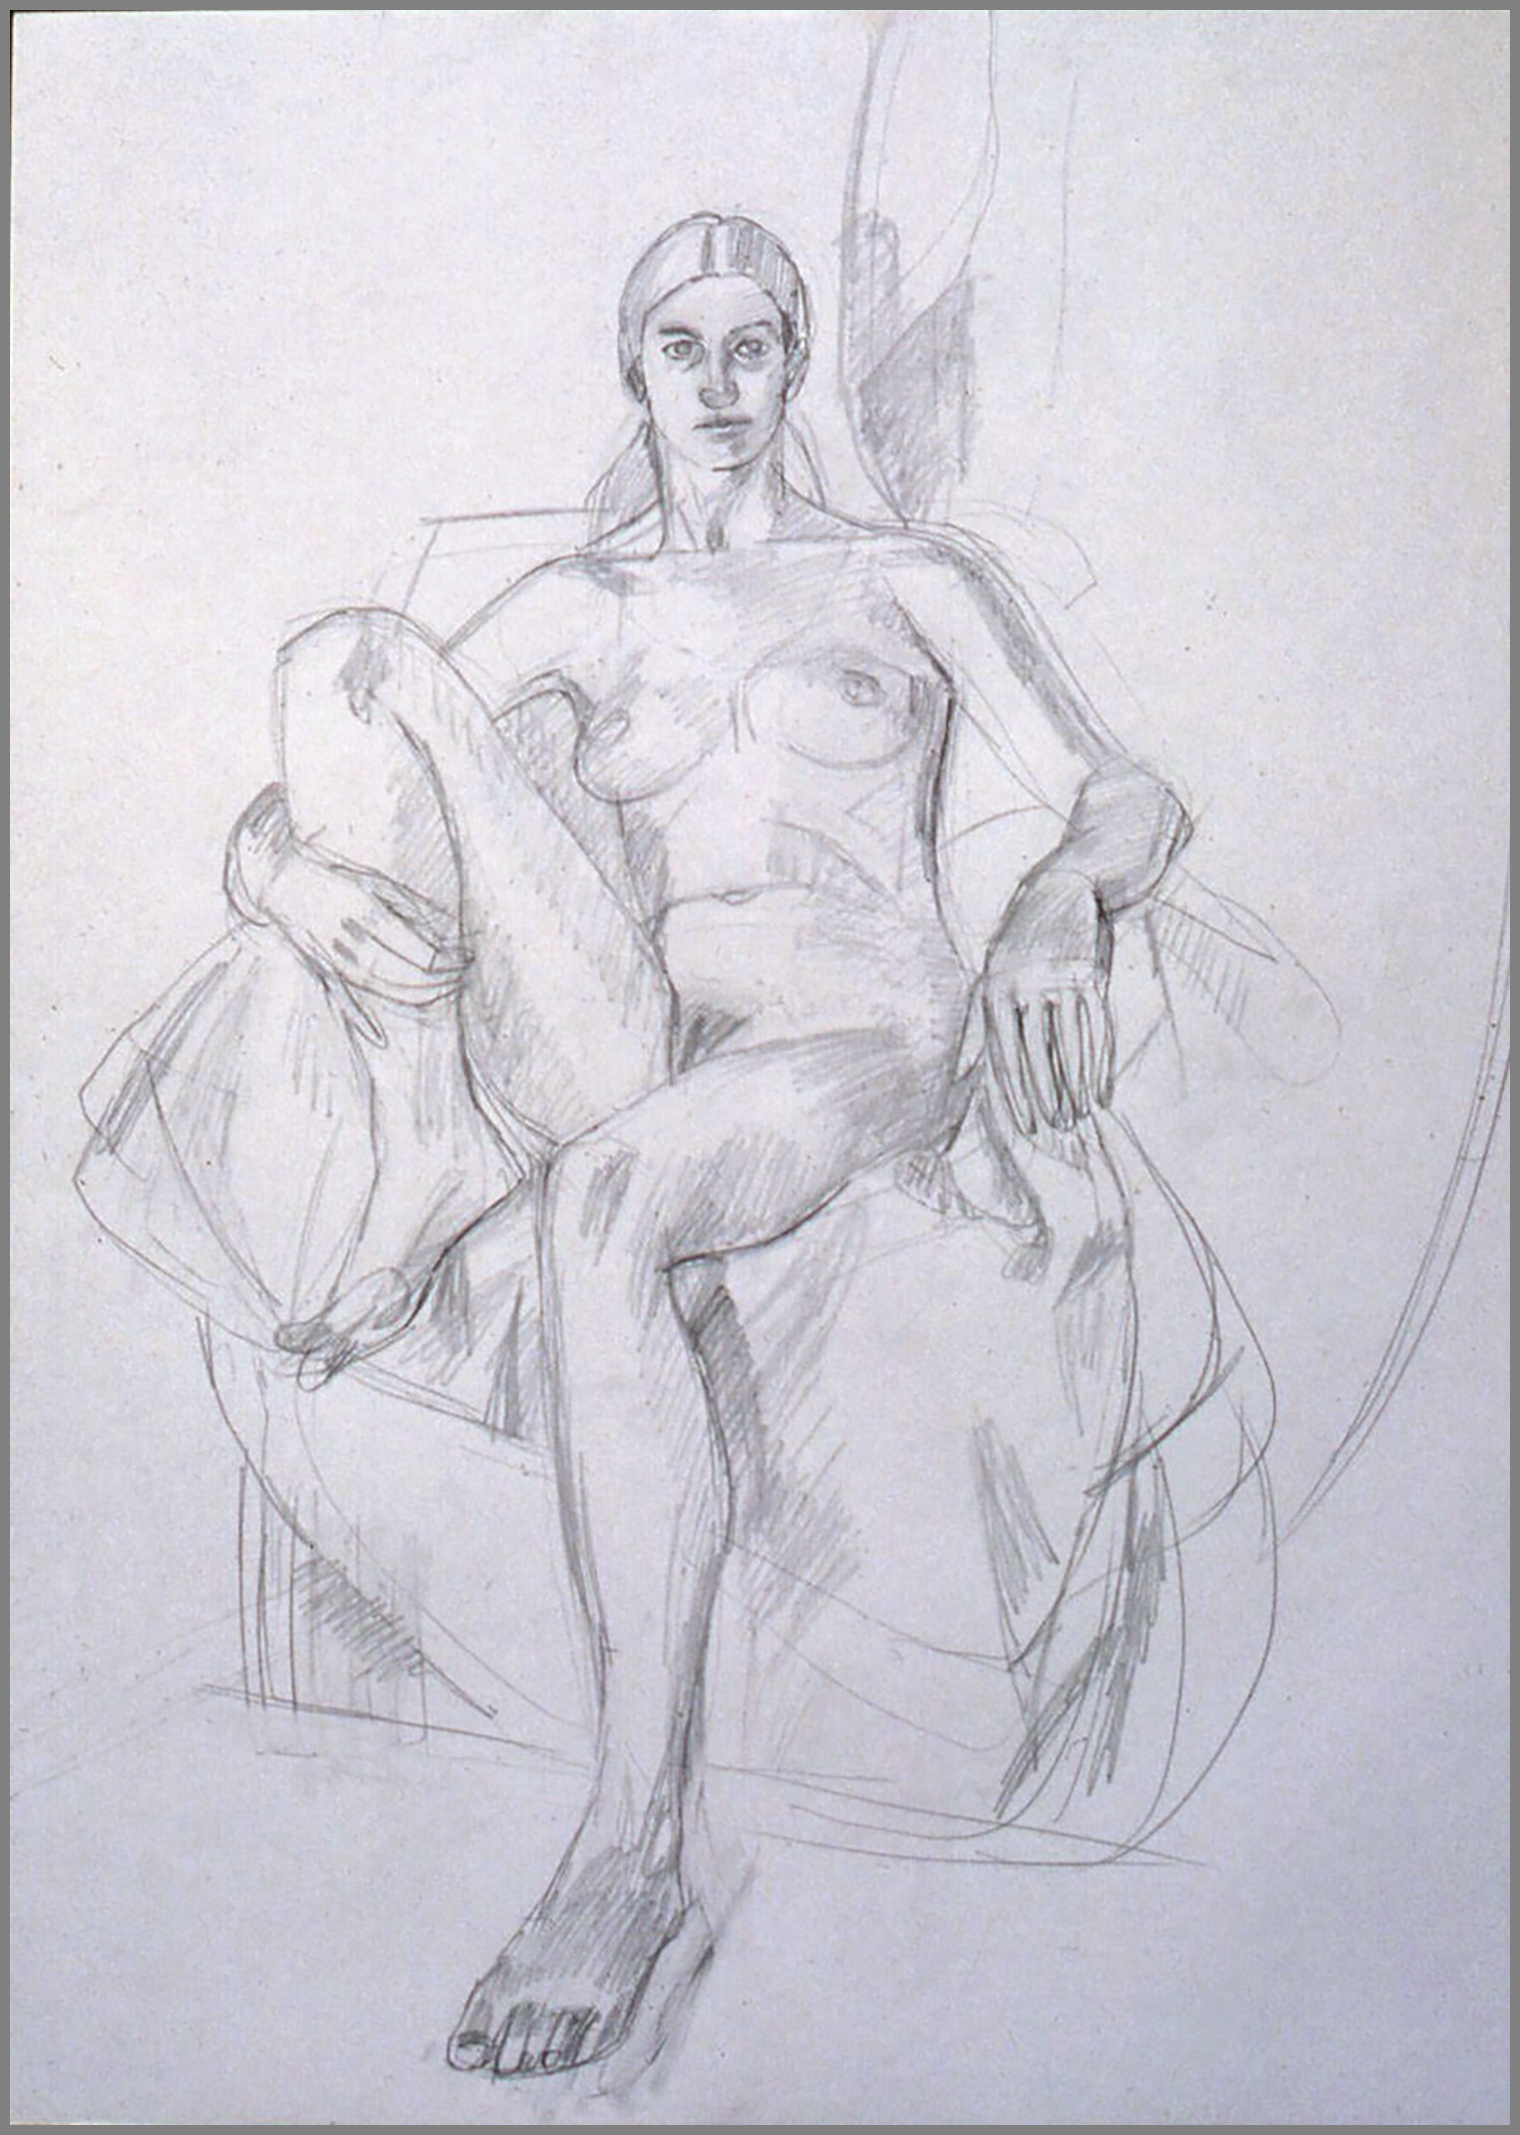  Seated Nude, pencil, 24 x 18 inches 